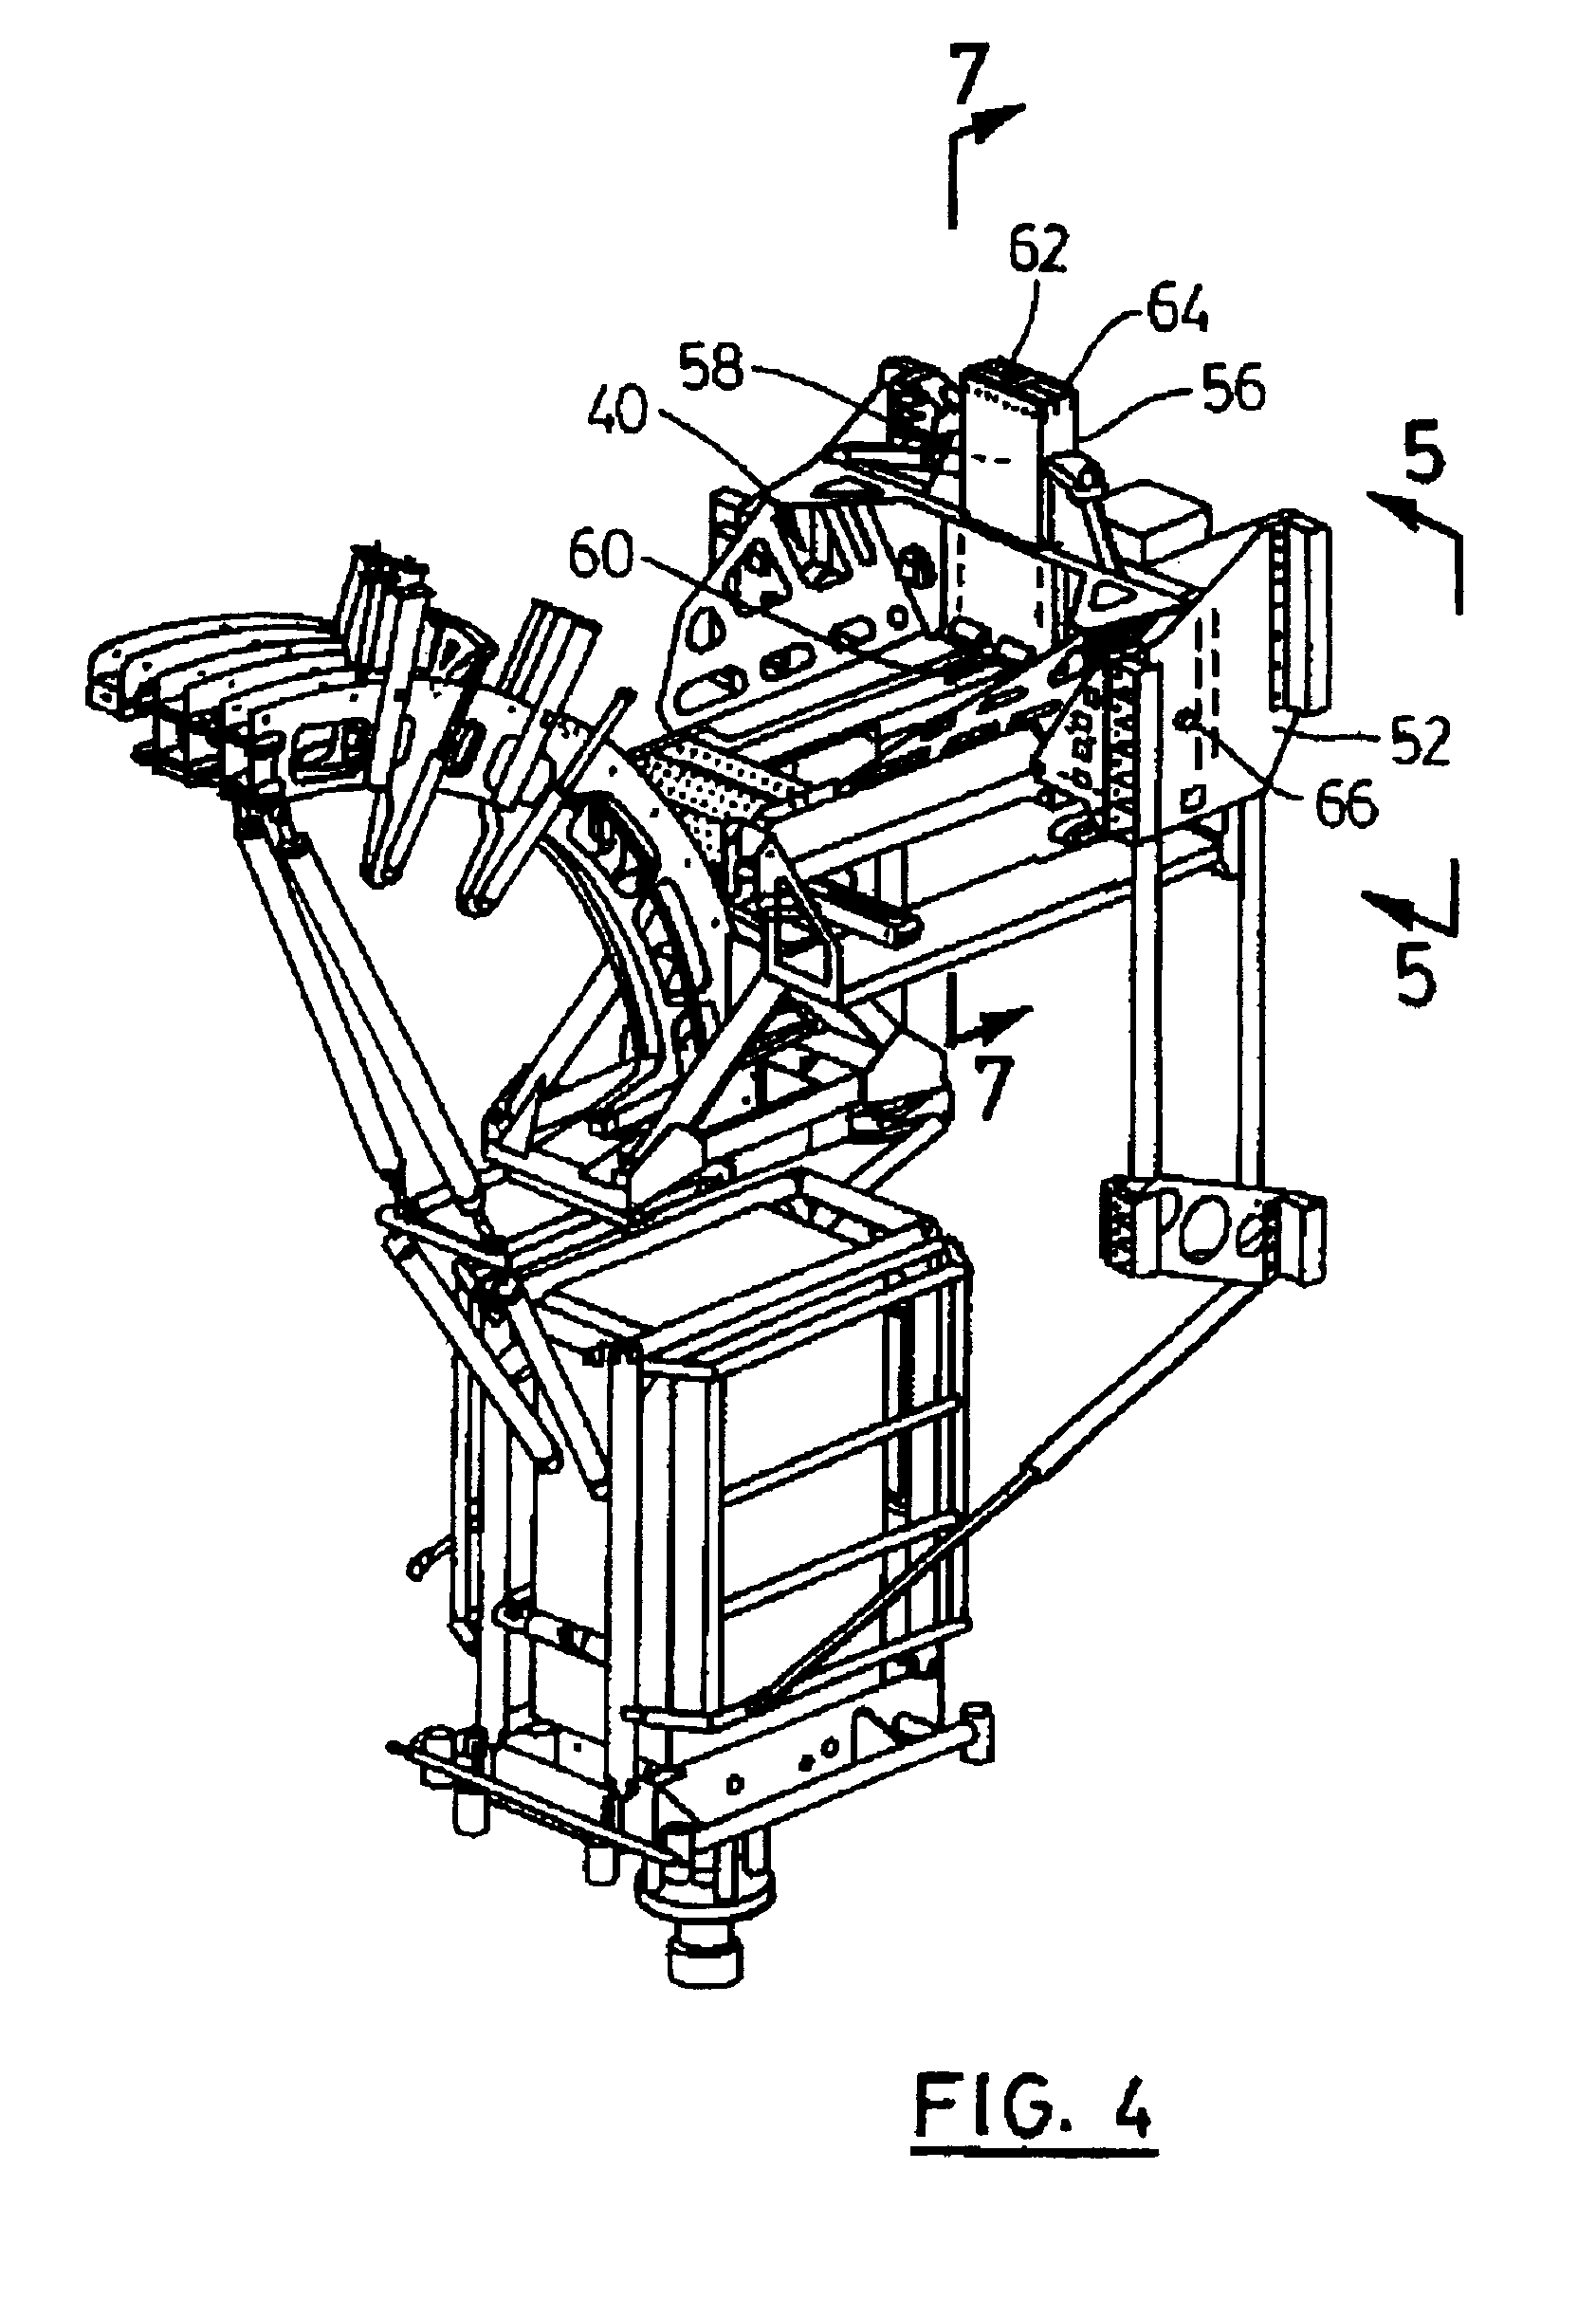 Trolley and traveling block system